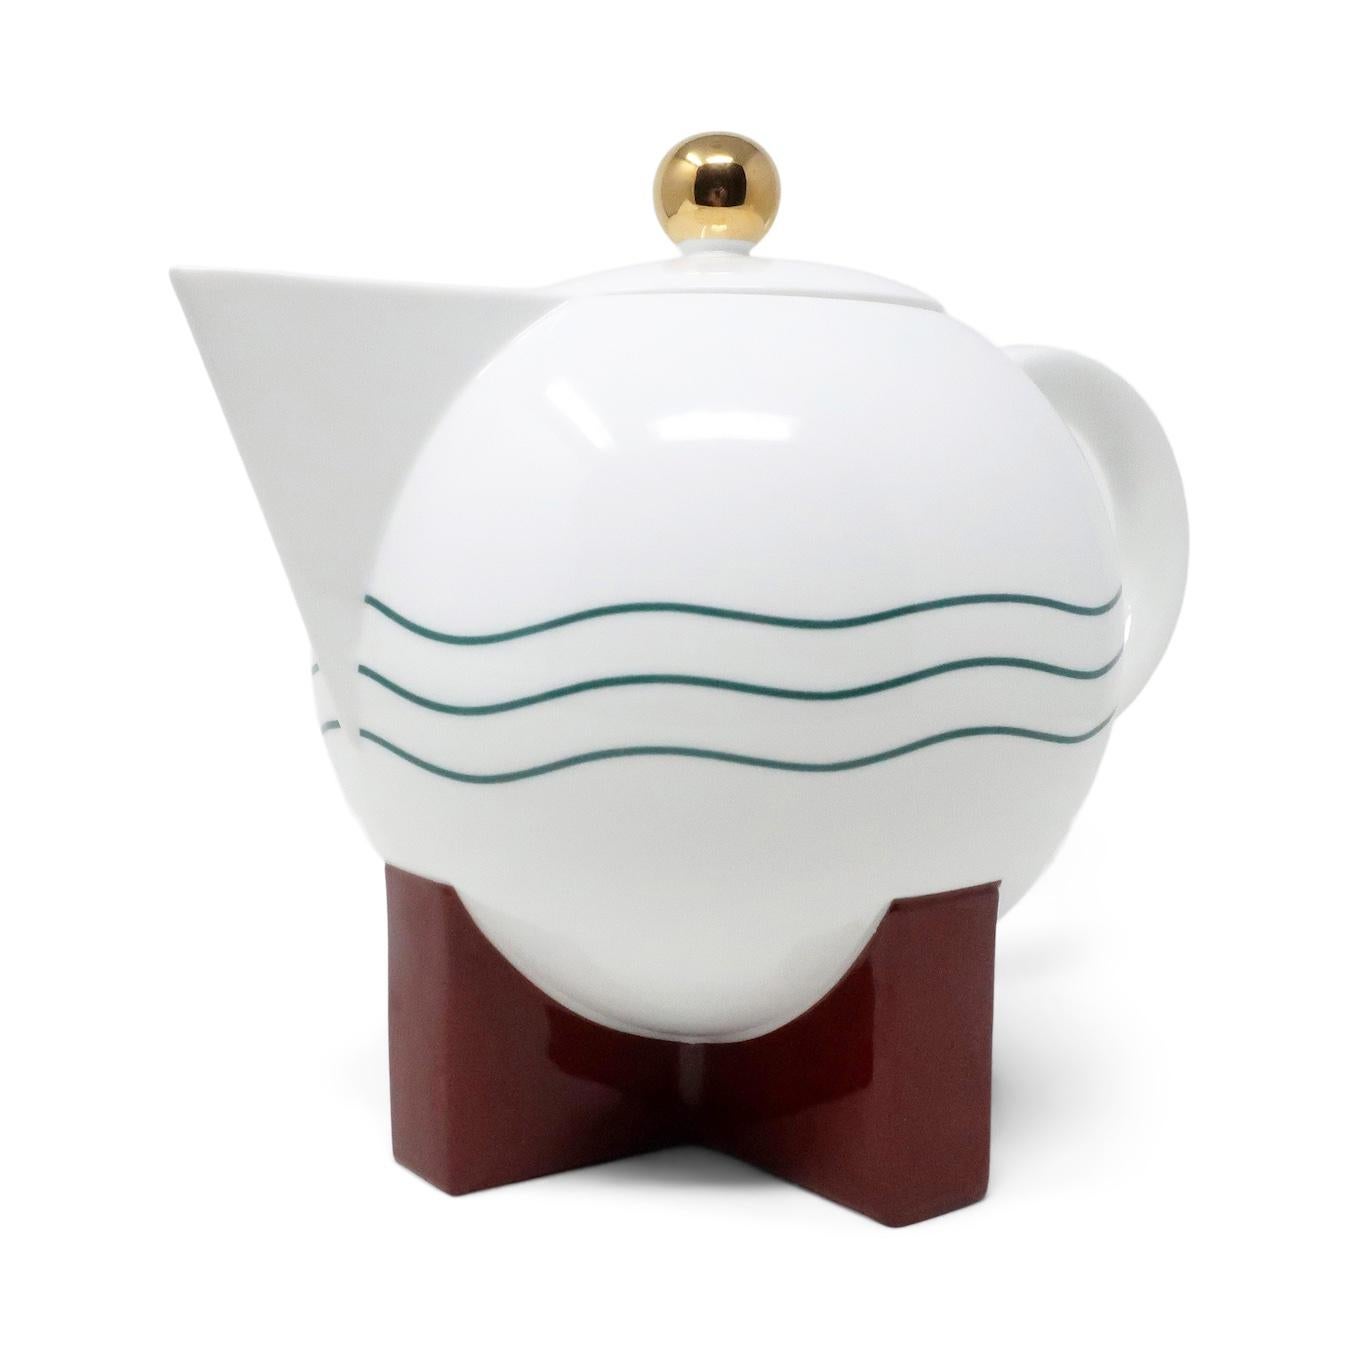 Perhaps Michael Graves' (1934-2015) most well-known design for Swid Powell, The Big Dripper (1986) is a 14 cup coffee pot born from Graves' preference for drip coffee and a lack of available drip coffee makers that met his aesthetic standards. High